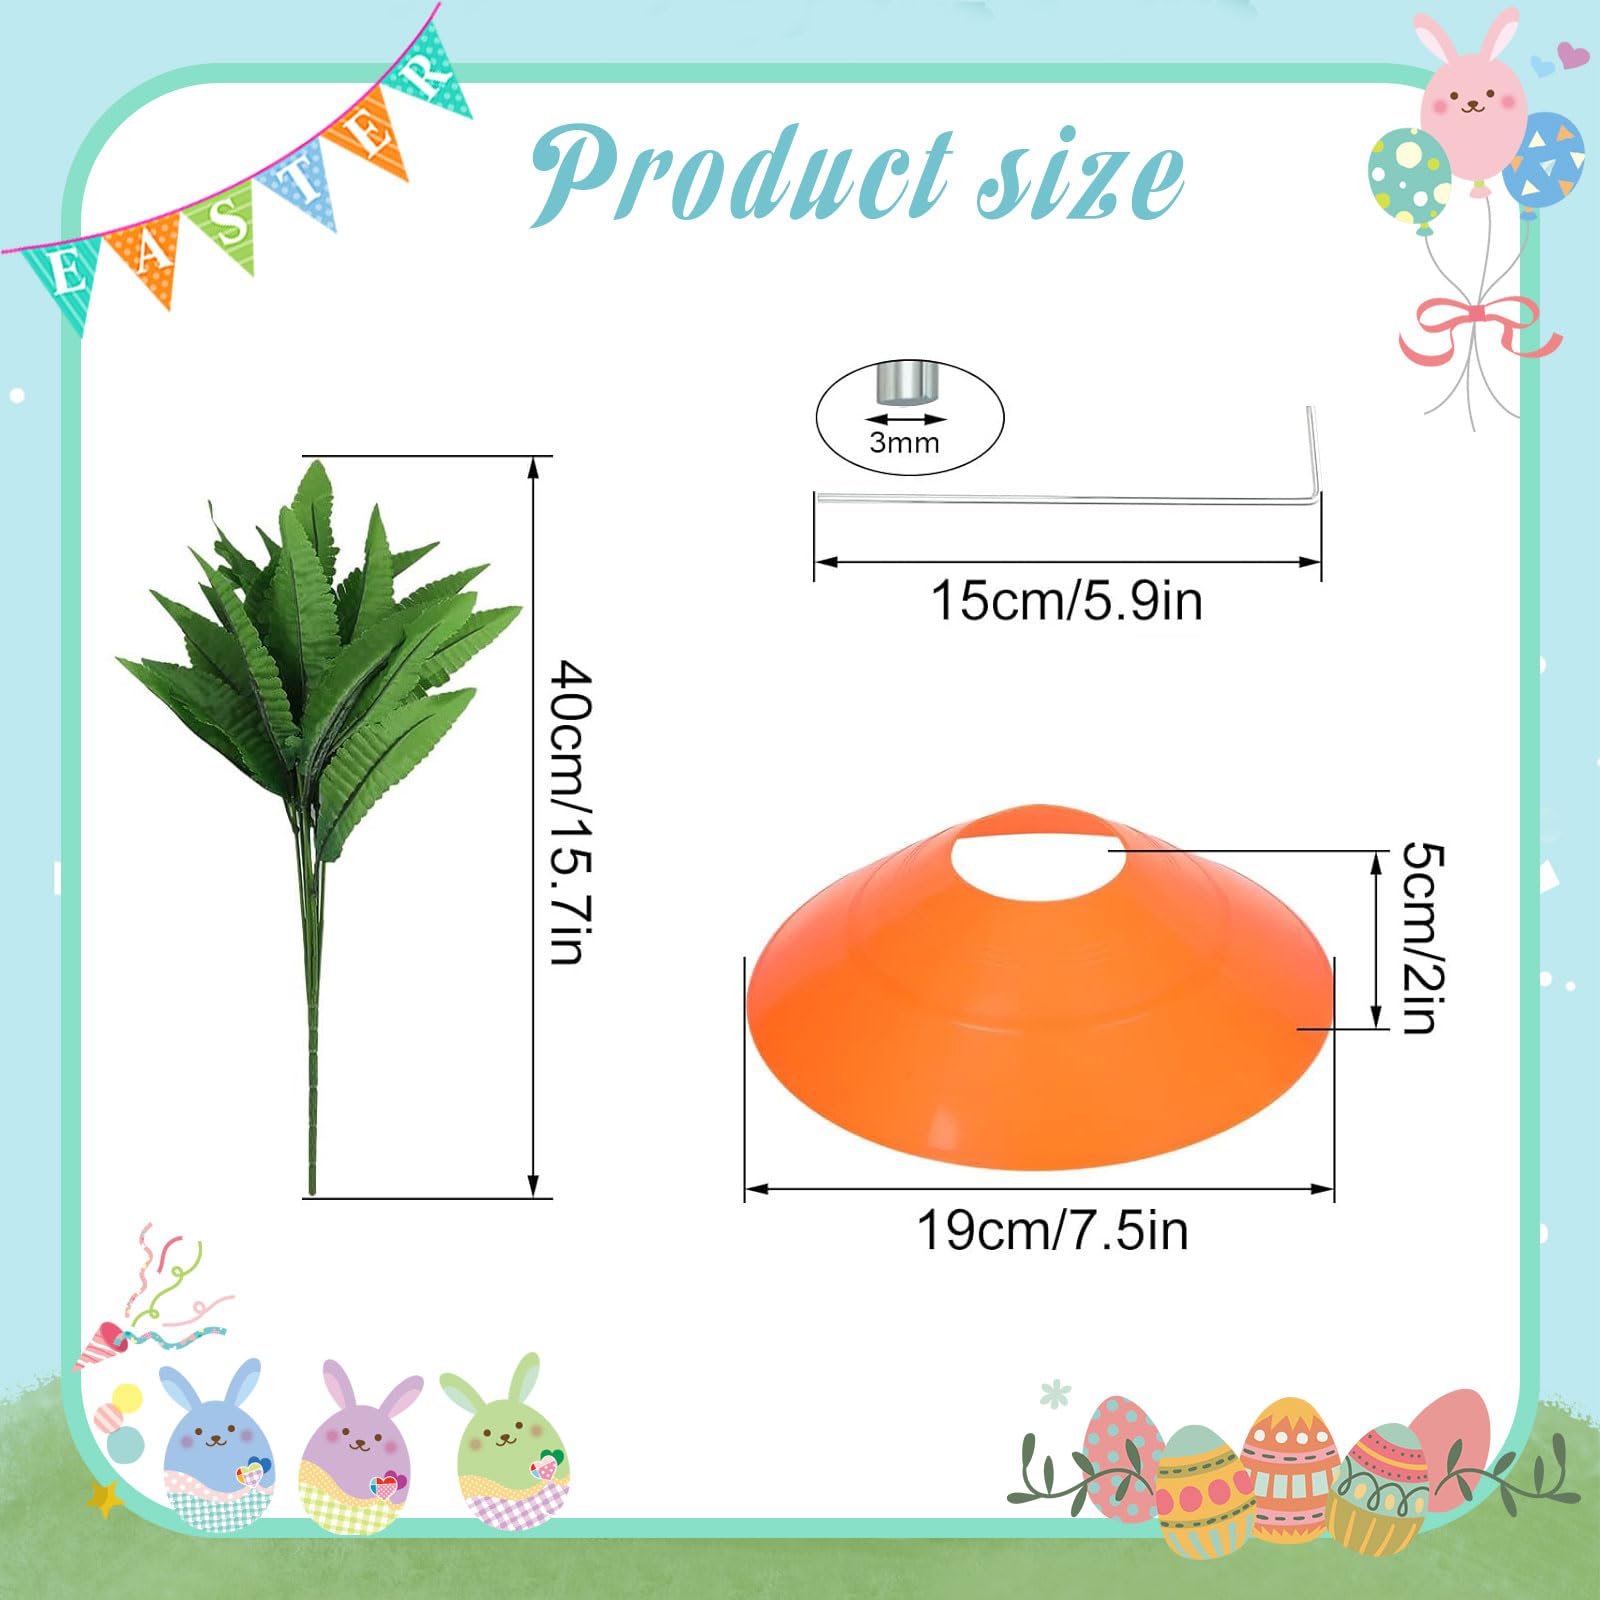 🥕Giant Simulated Carrot Yard Cute Easter Props🐰